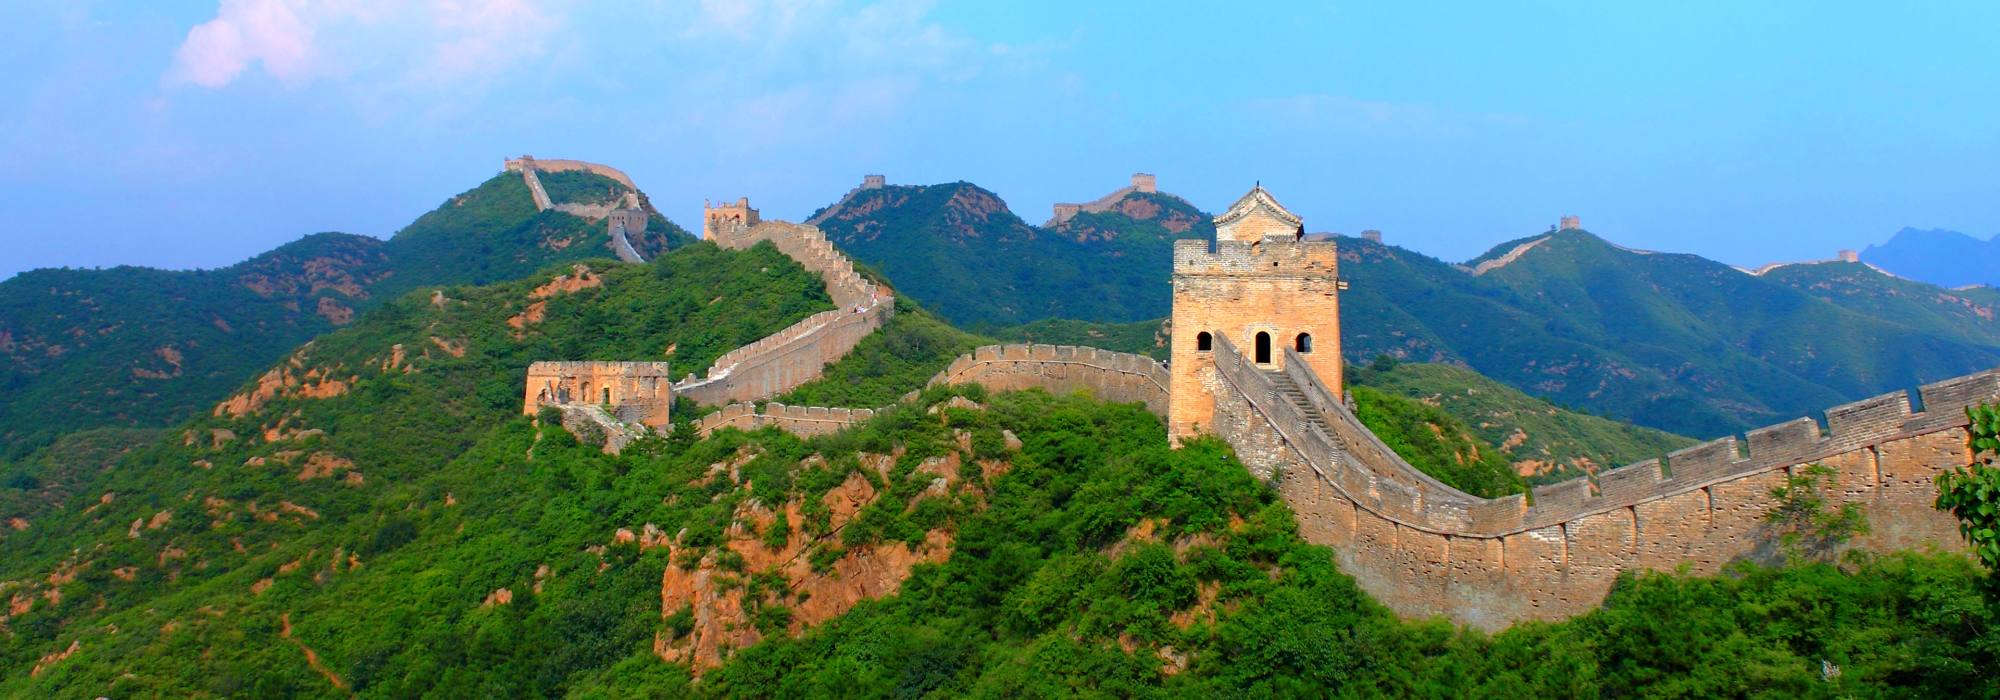 5-Day Beijing Private Tour of Tiananmen Square, Forbidden City,  Mutianyu Great Wall, Ming Tombs and Summer Palace